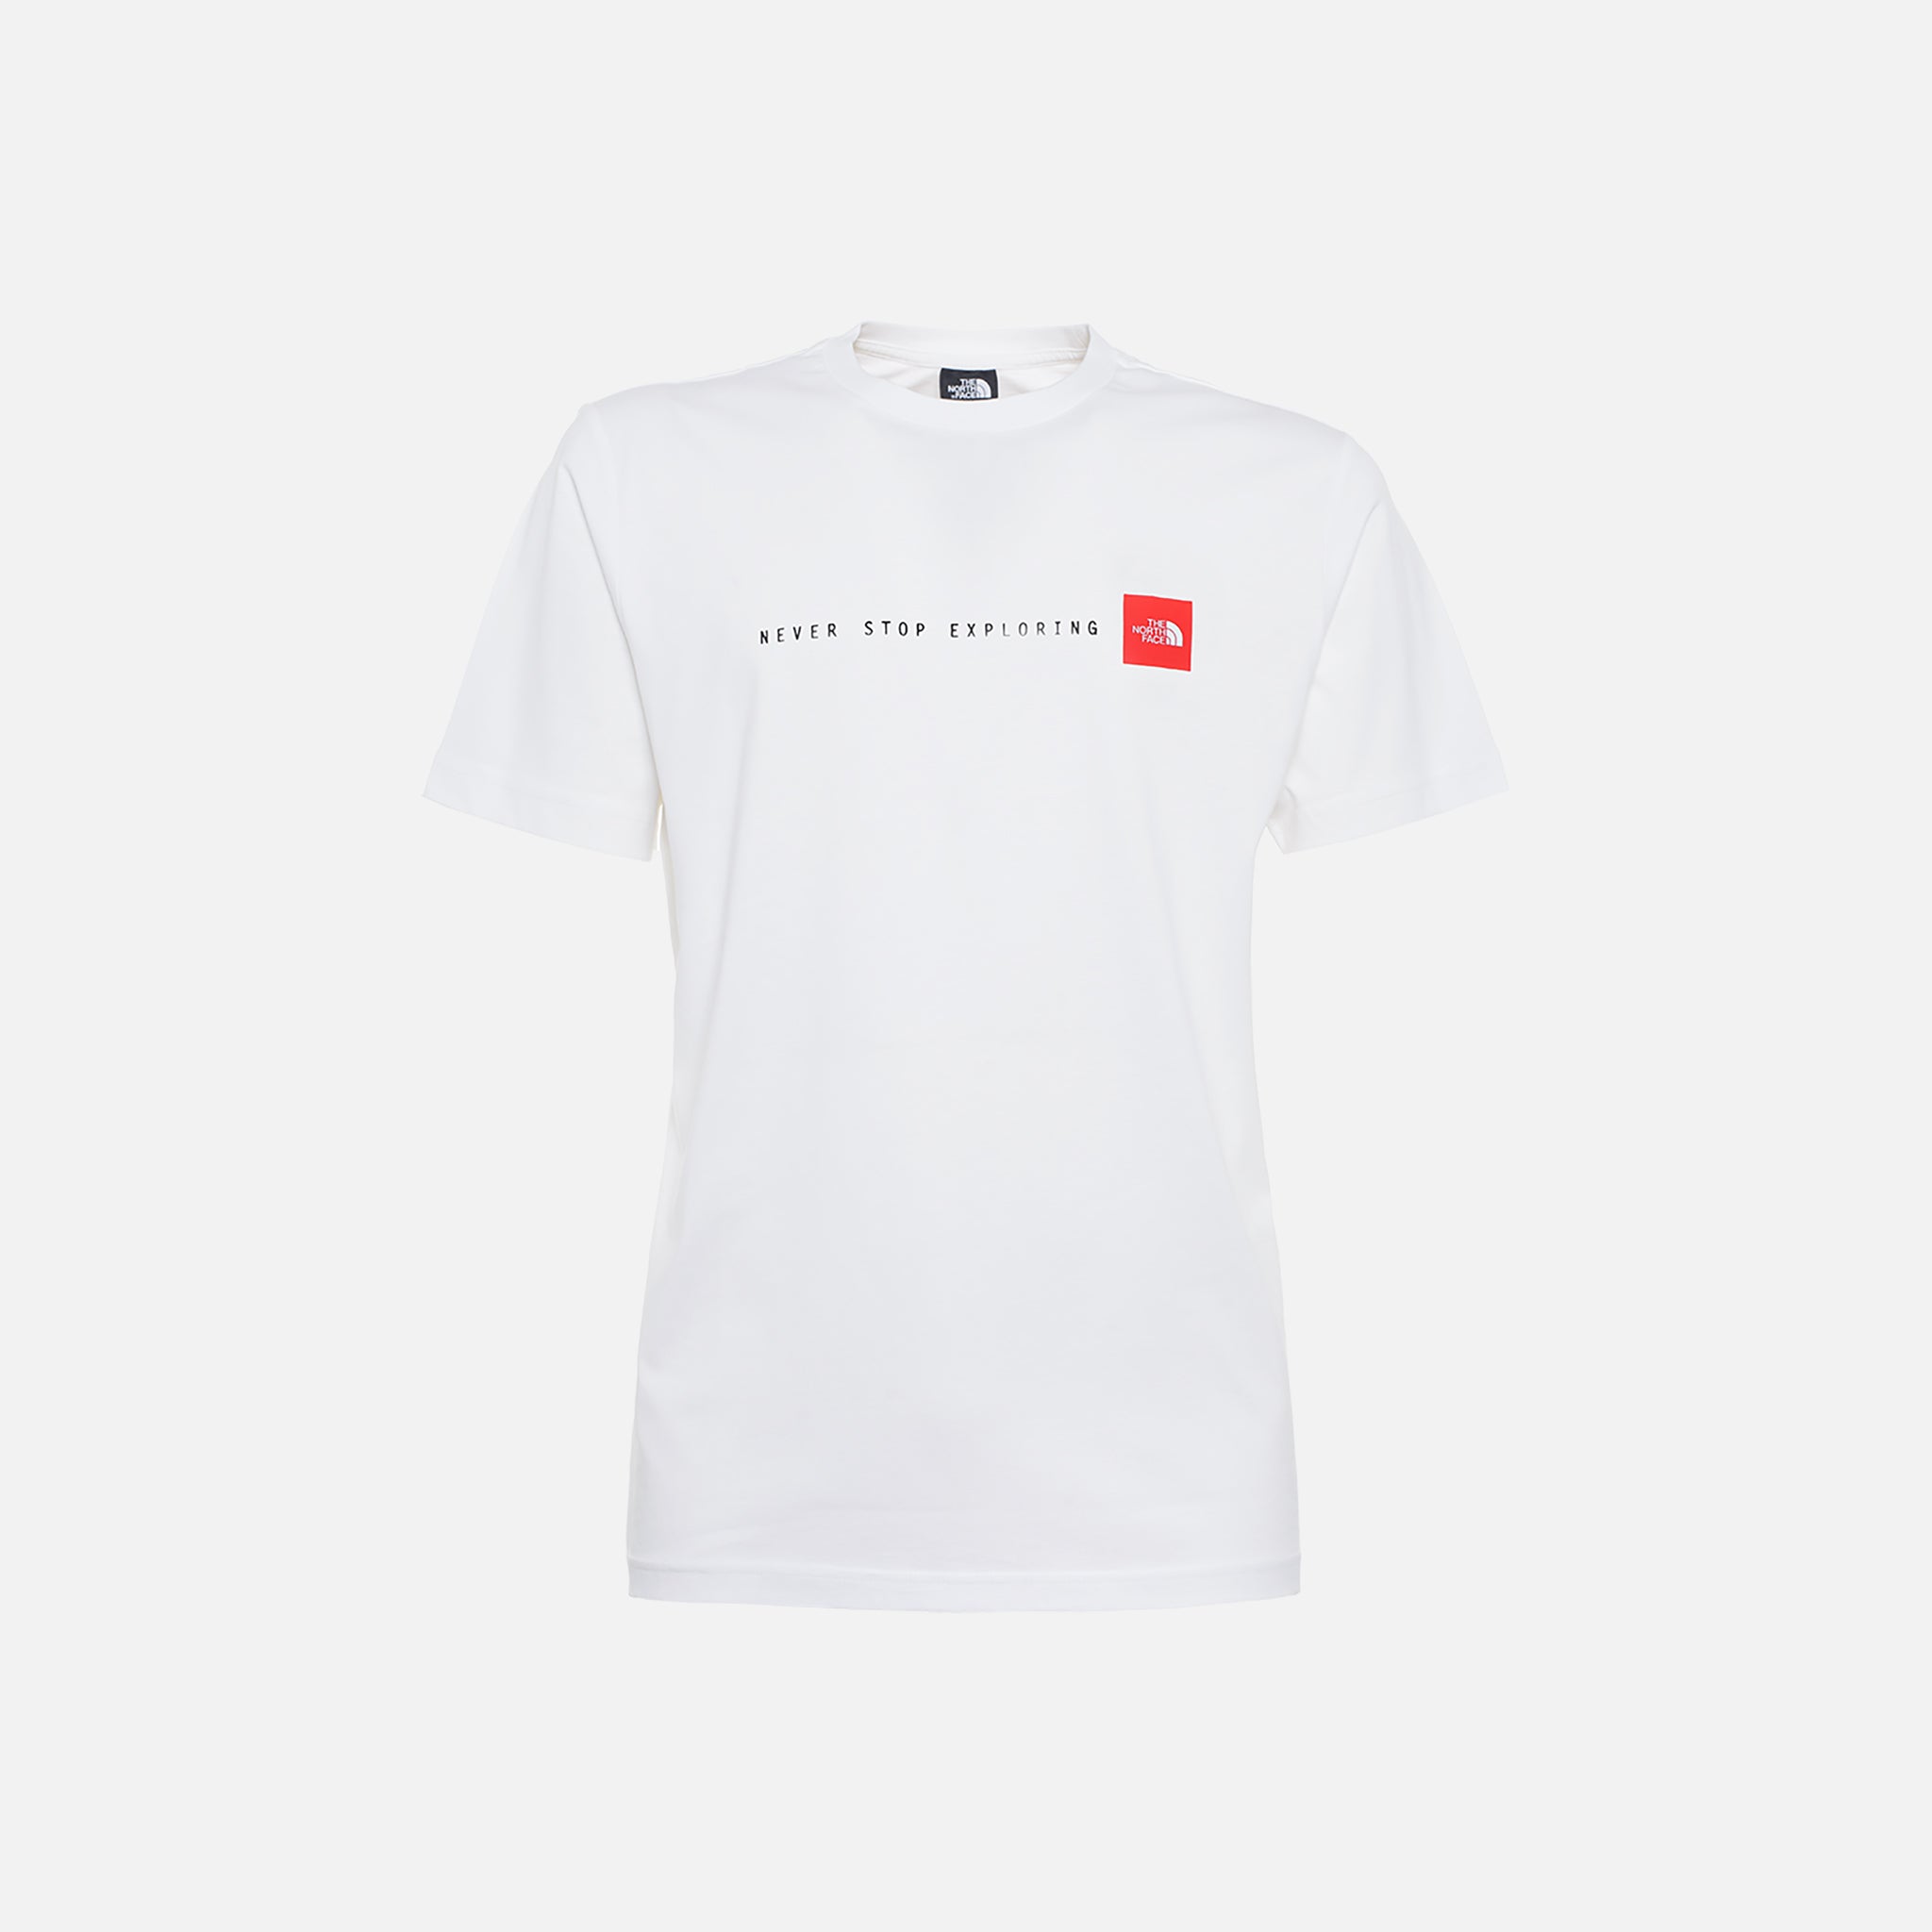 THE NORTH FACE T-SHIRT S/S NEVER STOP EXPLORING